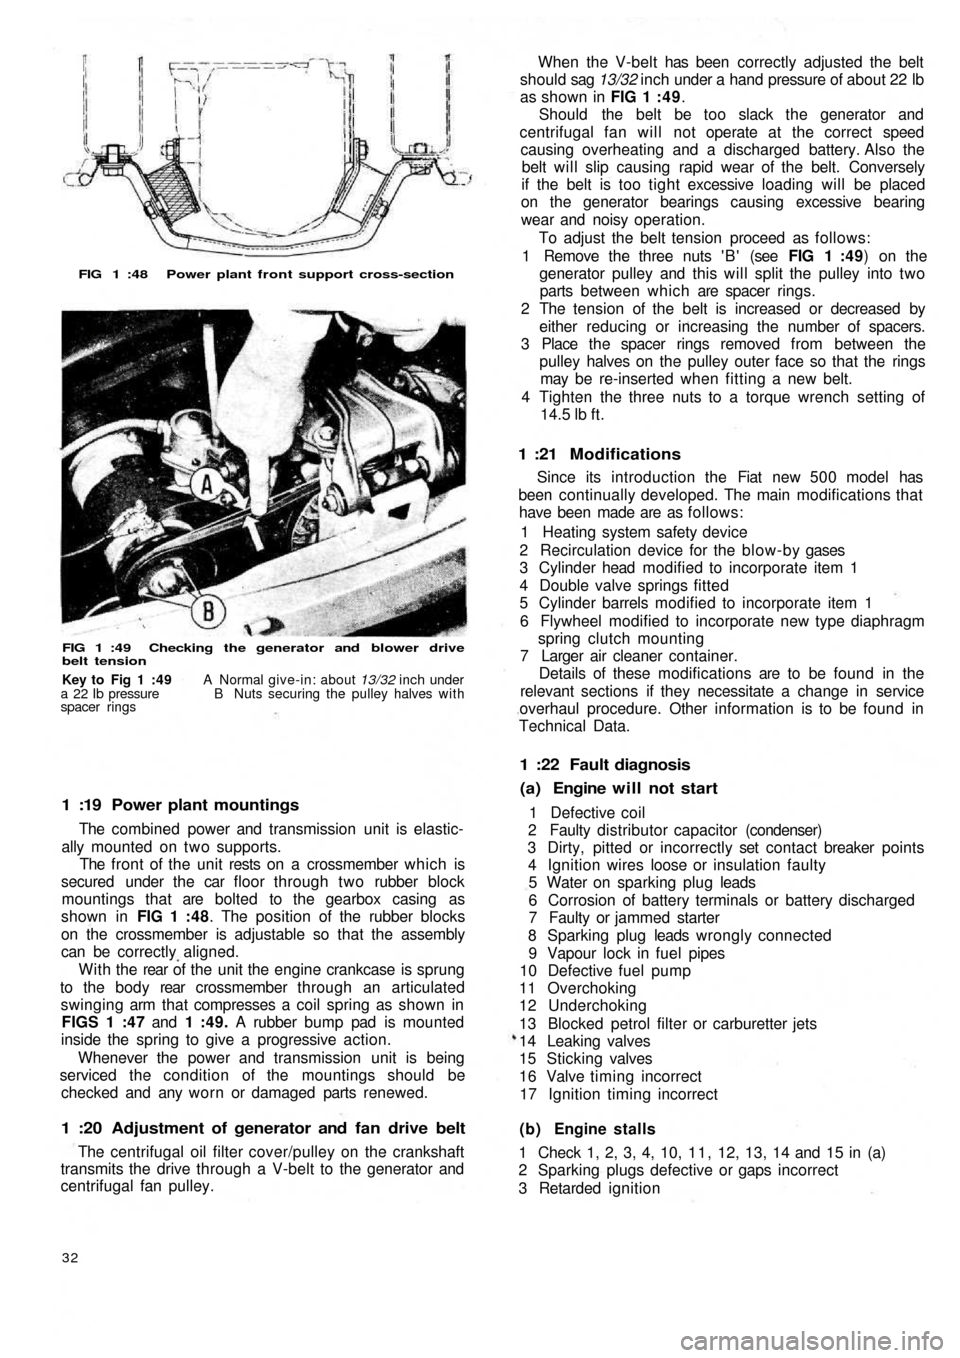 FIAT 500 1957 1.G Workshop Manual FIG 1 :48  Power plant front support cross-section
FIG 1 :49  Checking  the generator and  blower drive
belt tension
1 :19  Power plant mountings
The combined power and transmission unit is elastic-
a